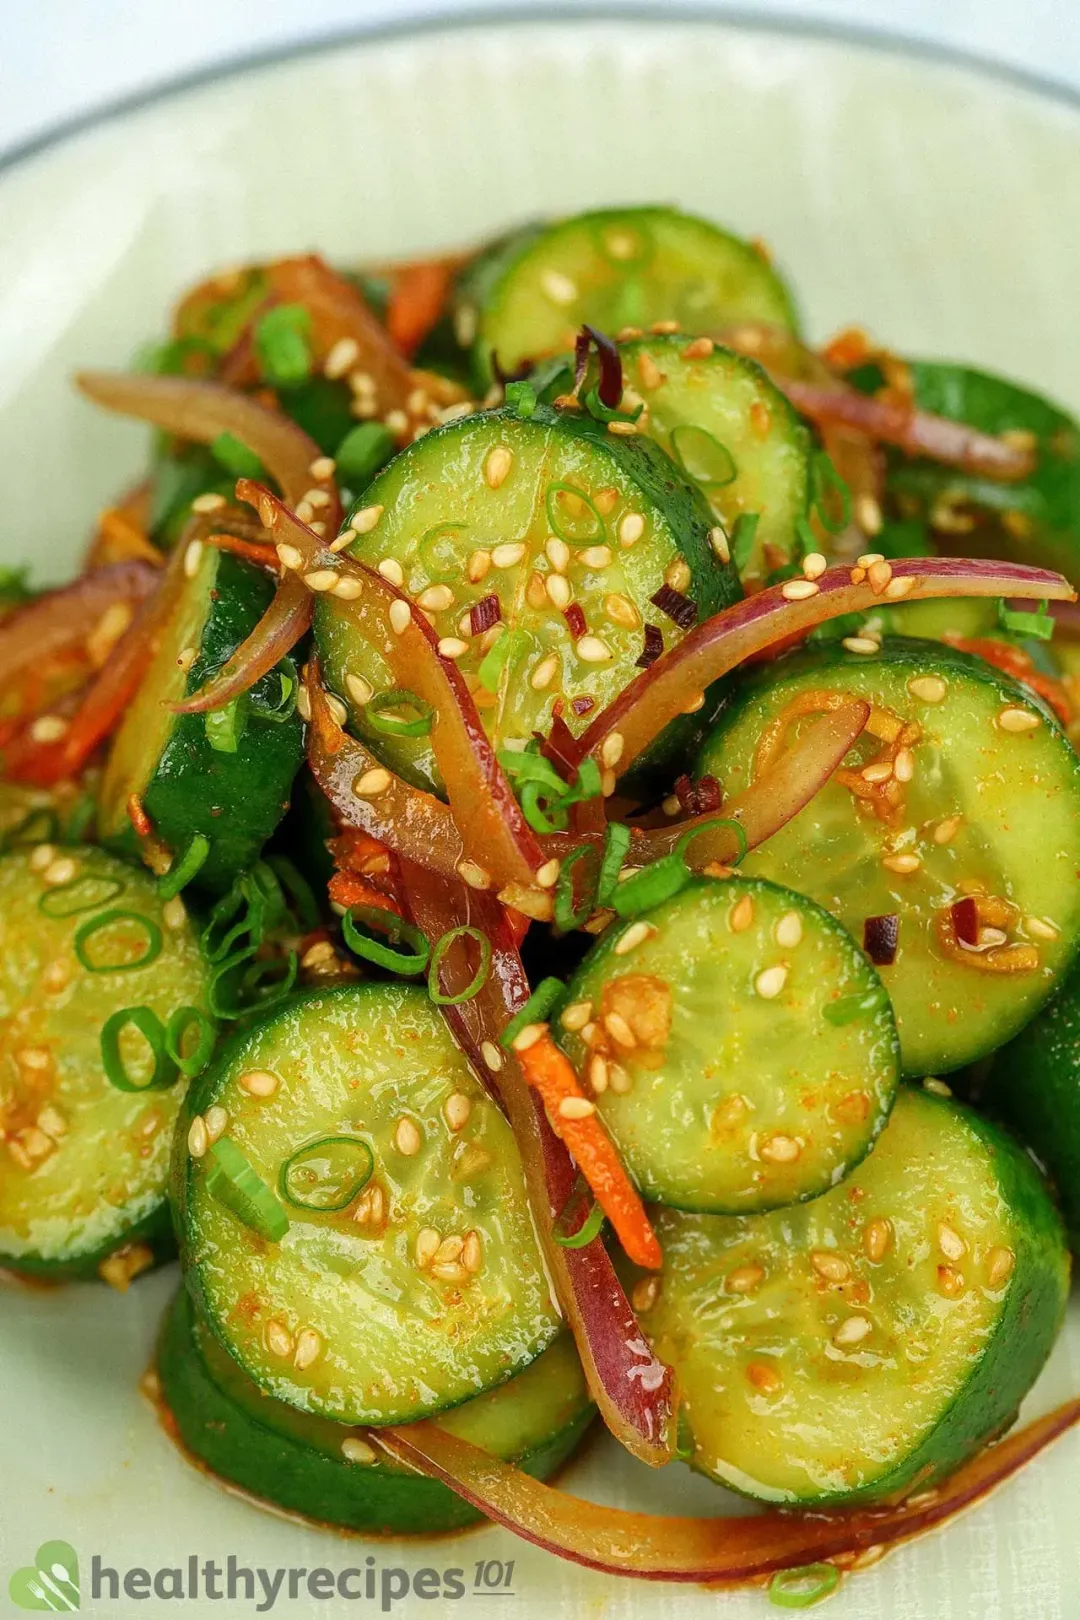 How Healthy Is Our Asian Cucumber Salad